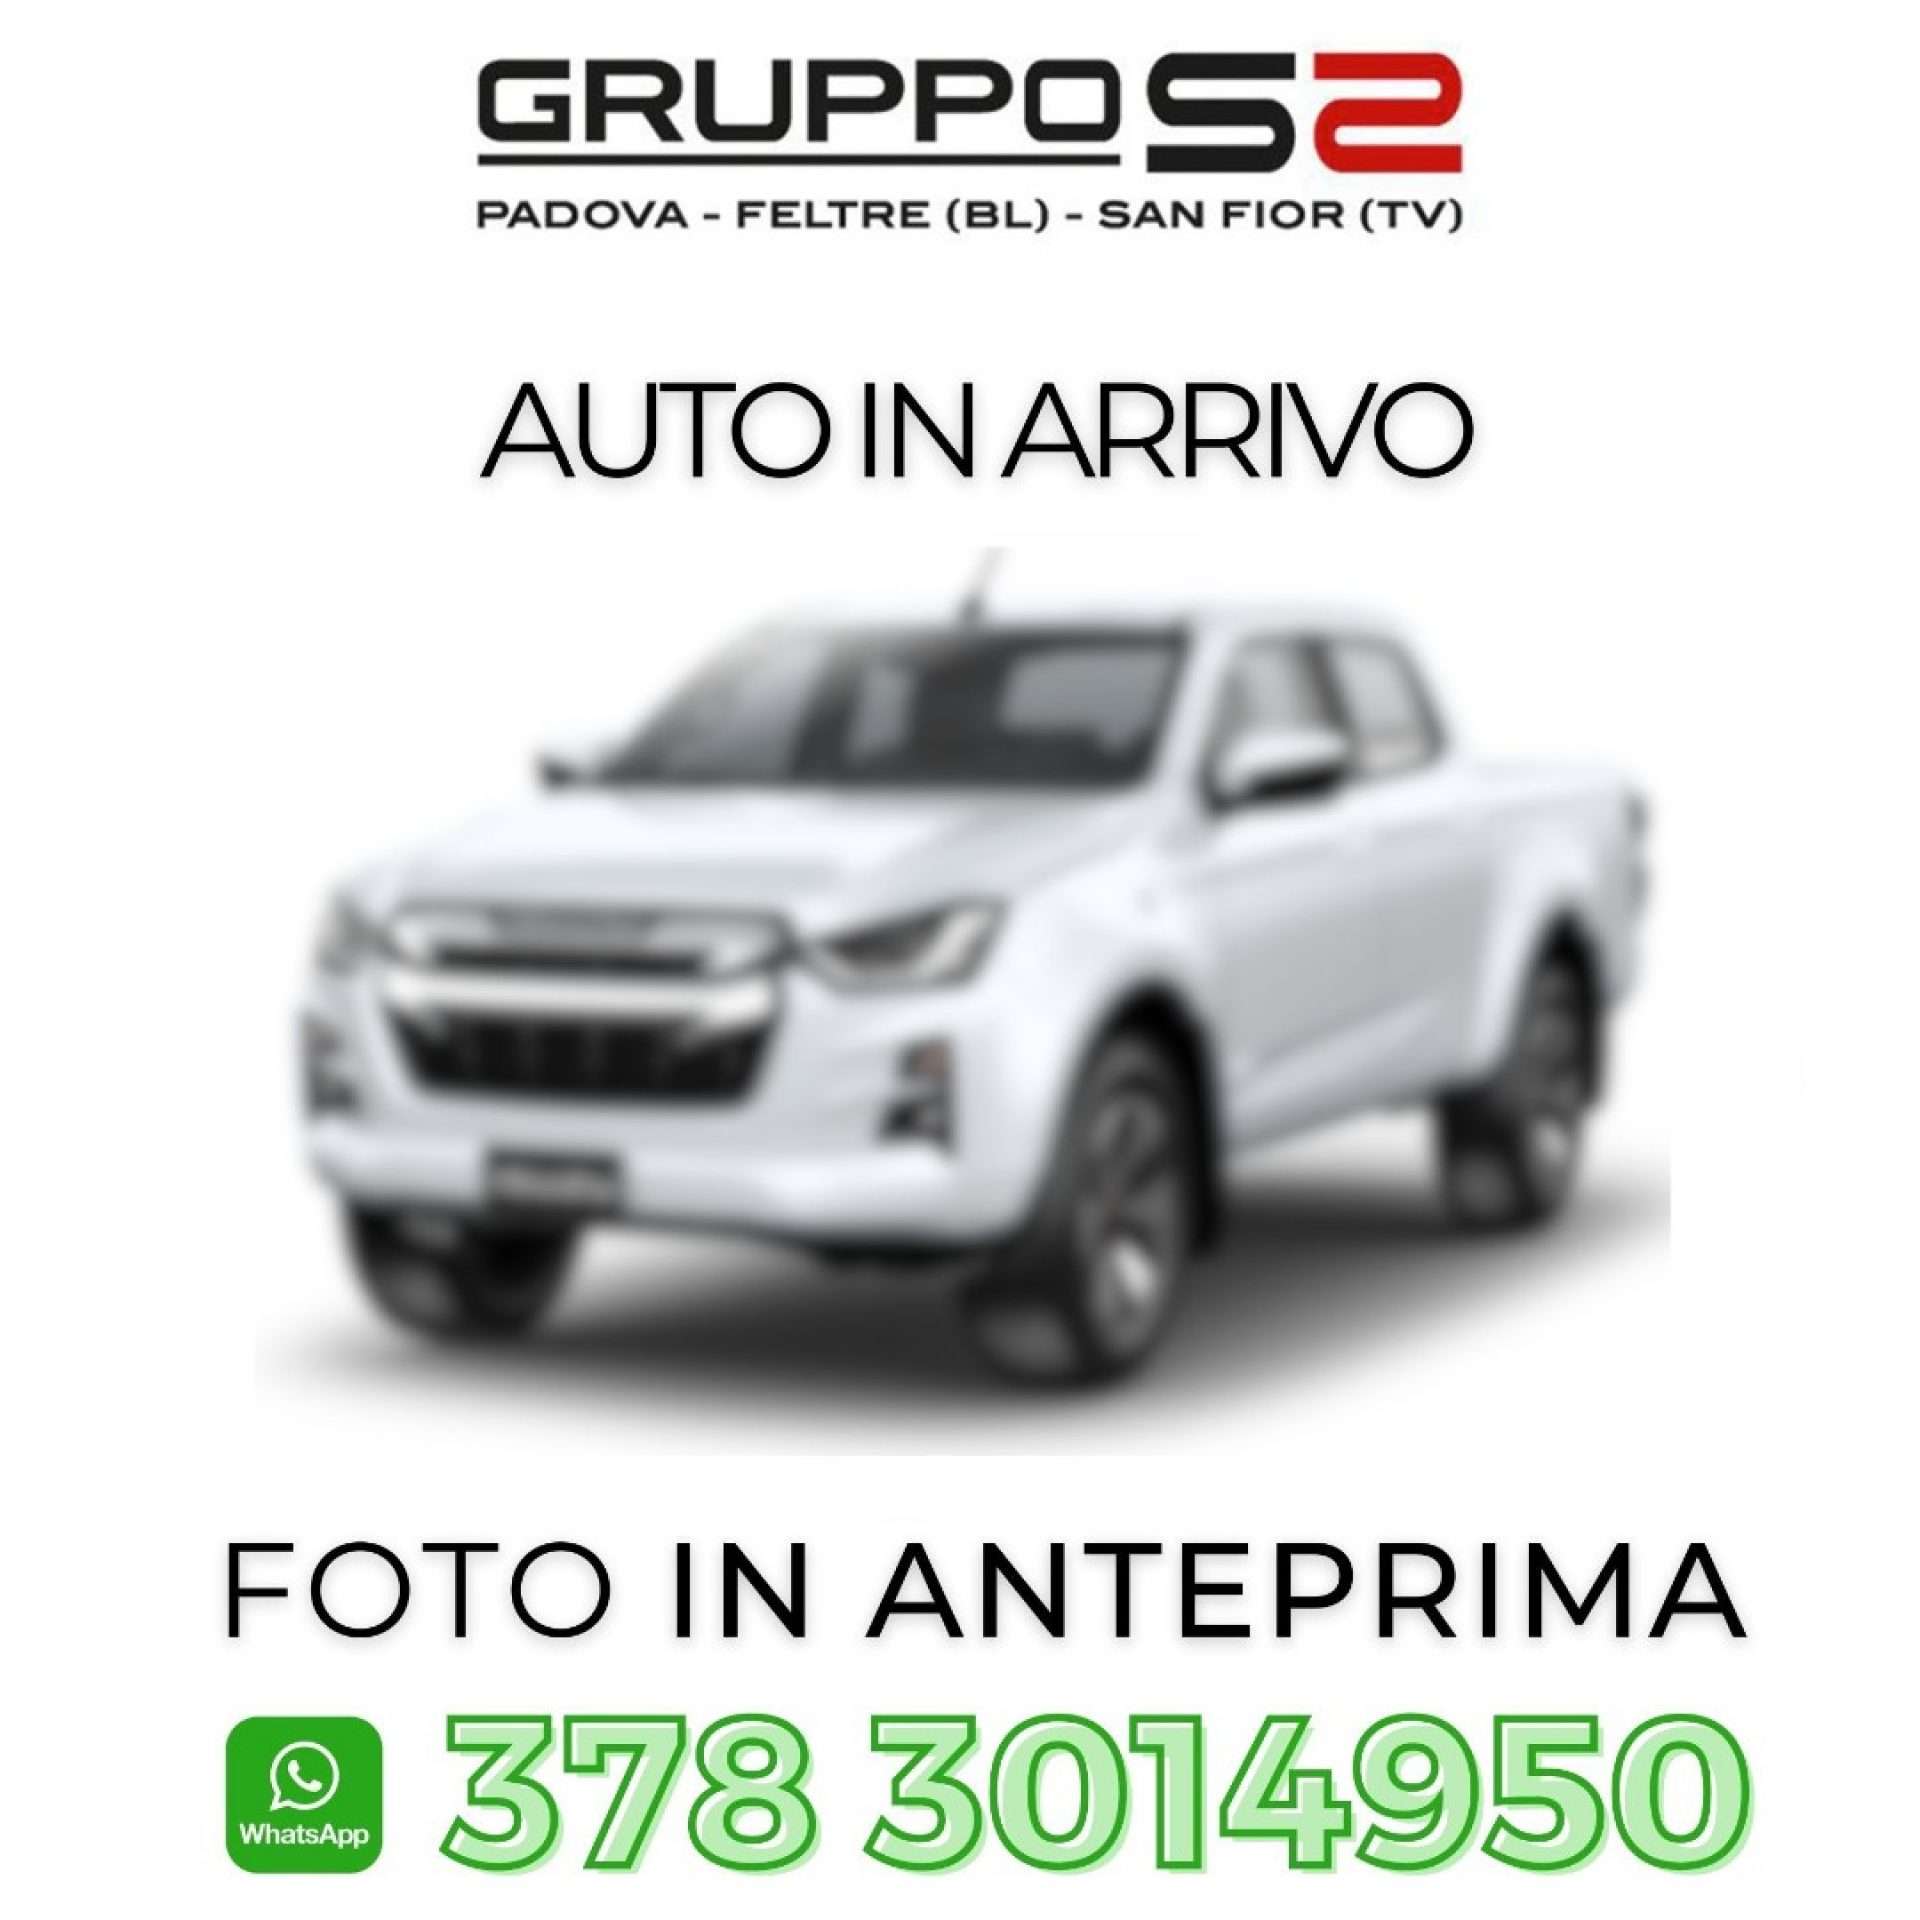 Isuzu D-Max Transporter in Silver used in Feltre - Bl for € 32,890.-